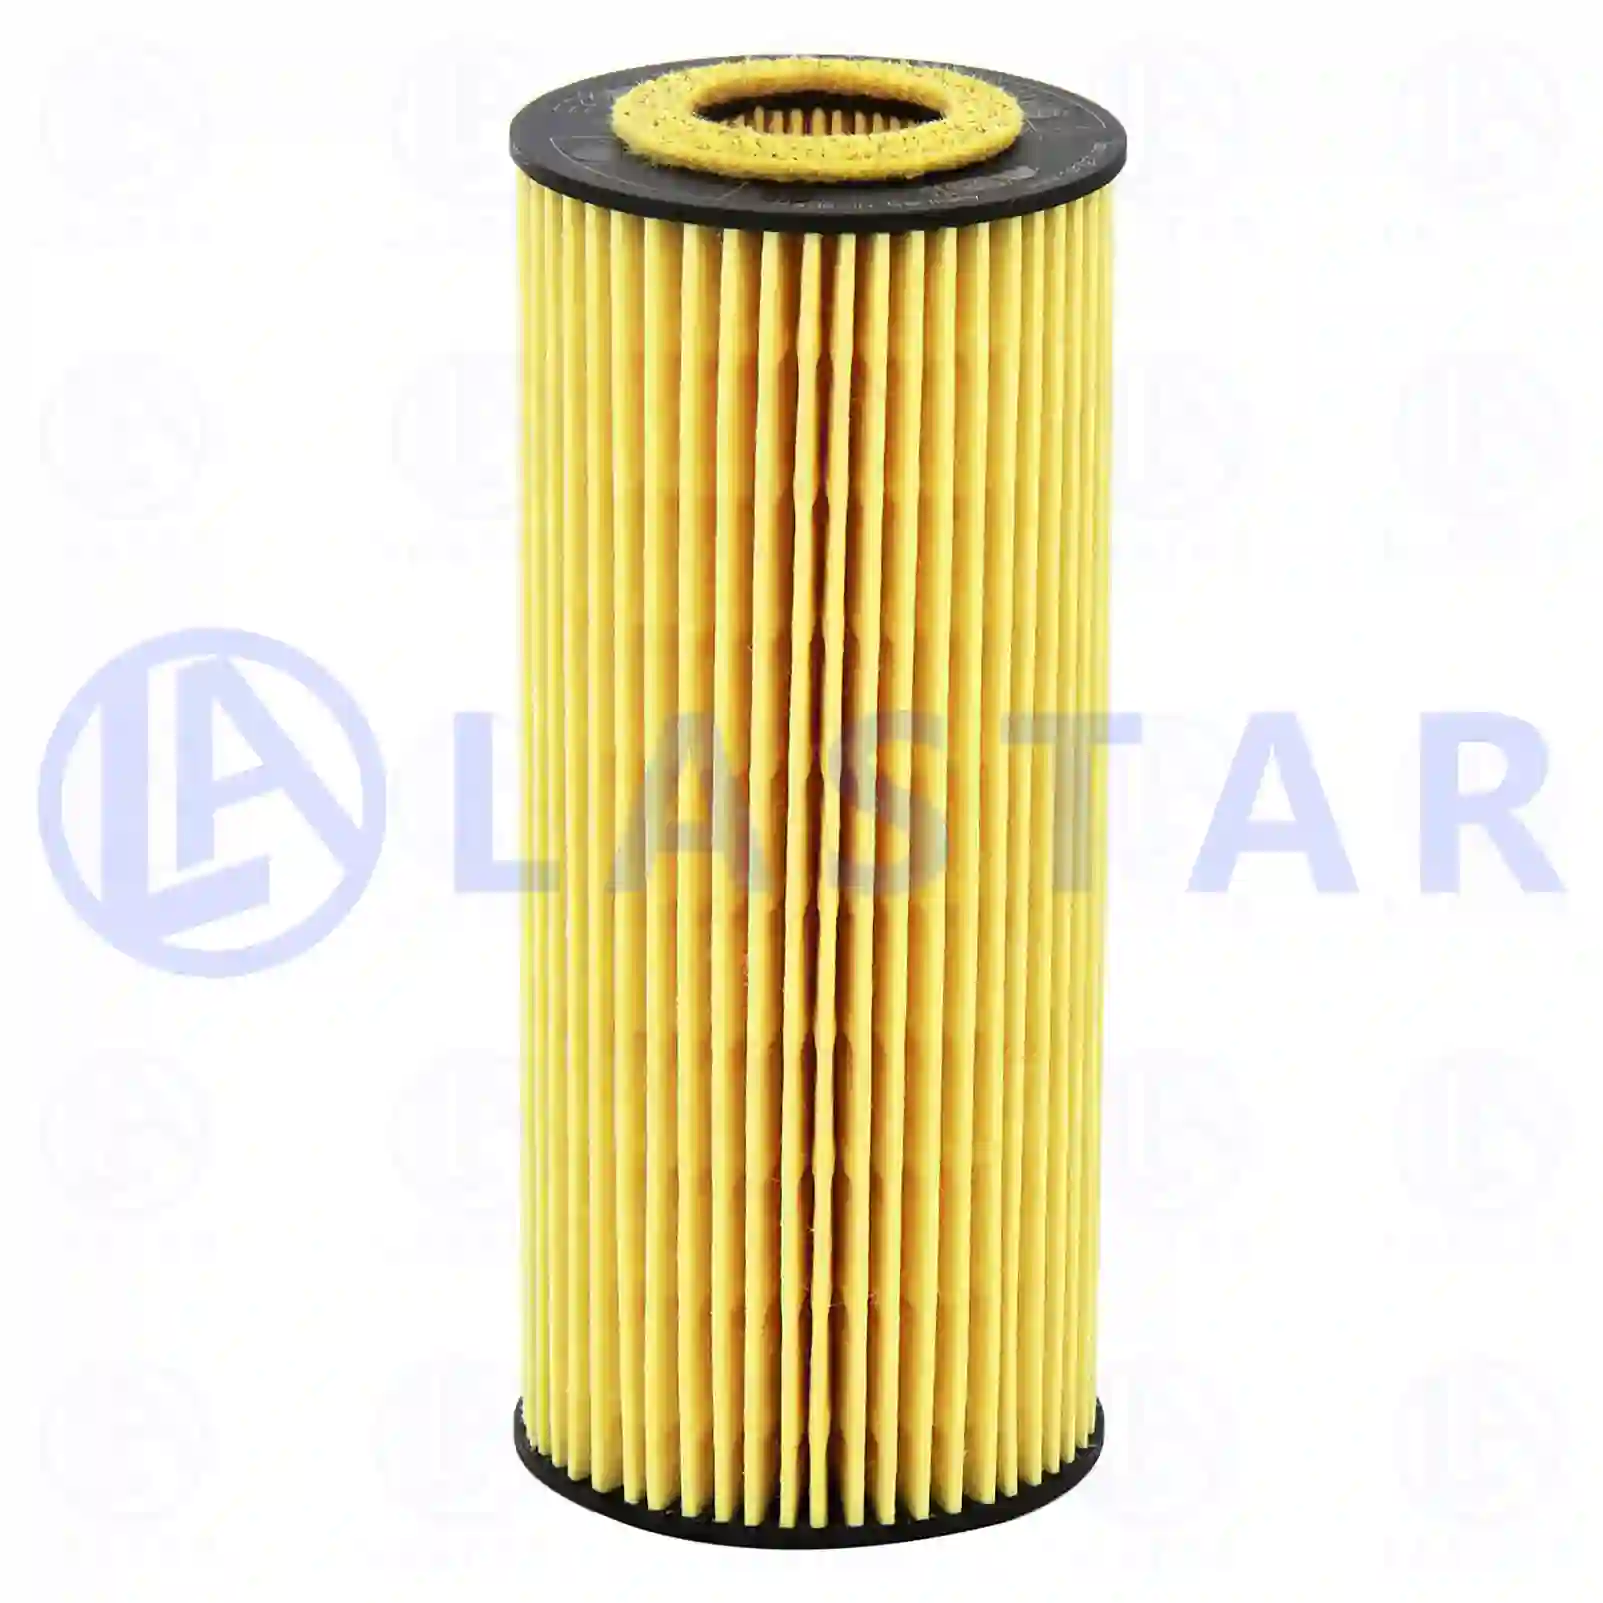 Oil filter insert, gearbox, 77731622, 1521527, 22023120, ZG02433-0008, ||  77731622 Lastar Spare Part | Truck Spare Parts, Auotomotive Spare Parts Oil filter insert, gearbox, 77731622, 1521527, 22023120, ZG02433-0008, ||  77731622 Lastar Spare Part | Truck Spare Parts, Auotomotive Spare Parts